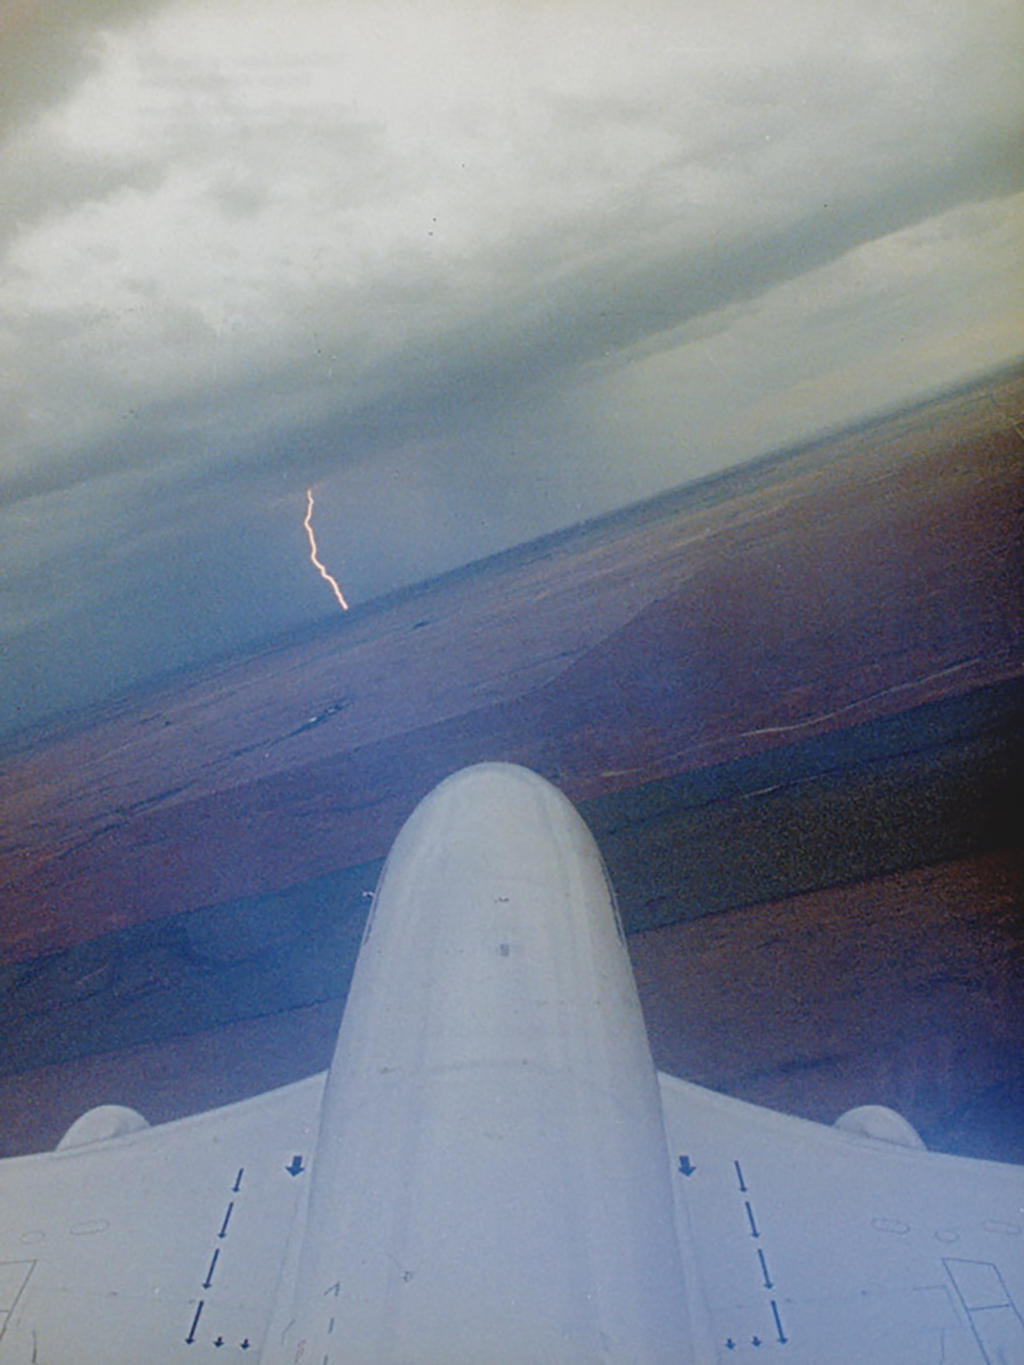 A tail-mounted camera on board NASA’s Boeing 737 as it approached a thunderstorm during microburst wind shear research.